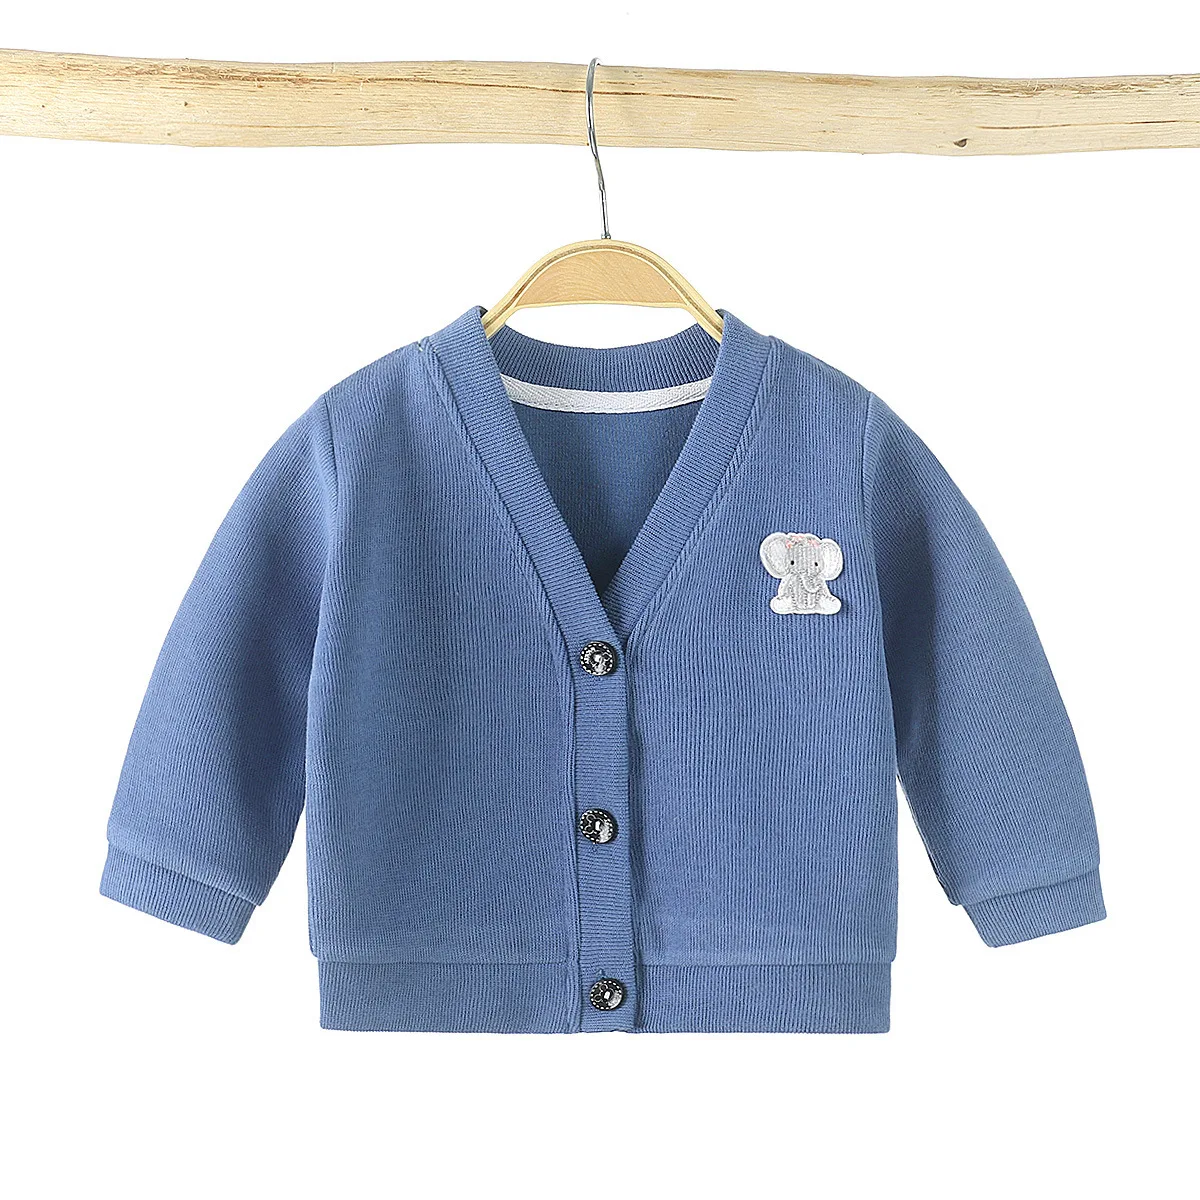 
Plush 2021 spring baby sweater v-neck cardigan jacket long sleeves baby boy and girl baby pure color child interest 